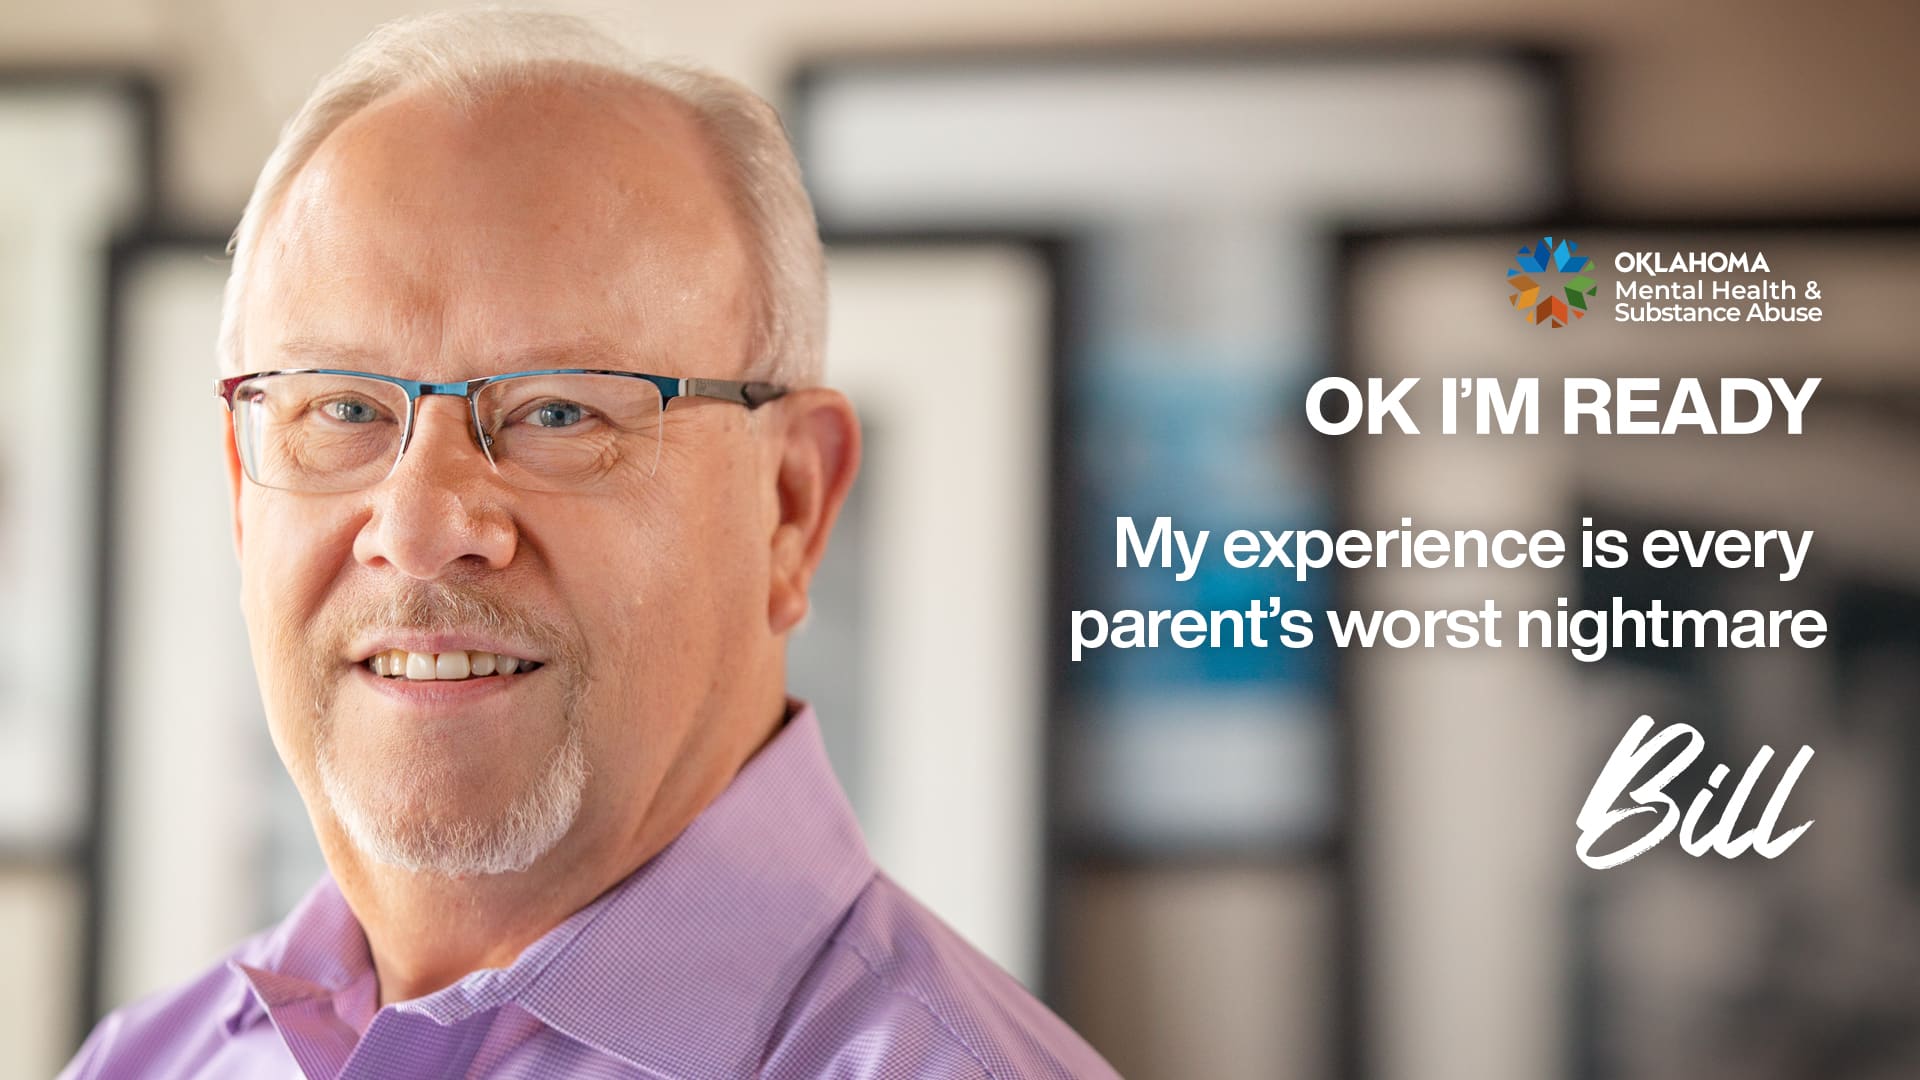 Video Cover. Bill, a parent's experience with SUD.